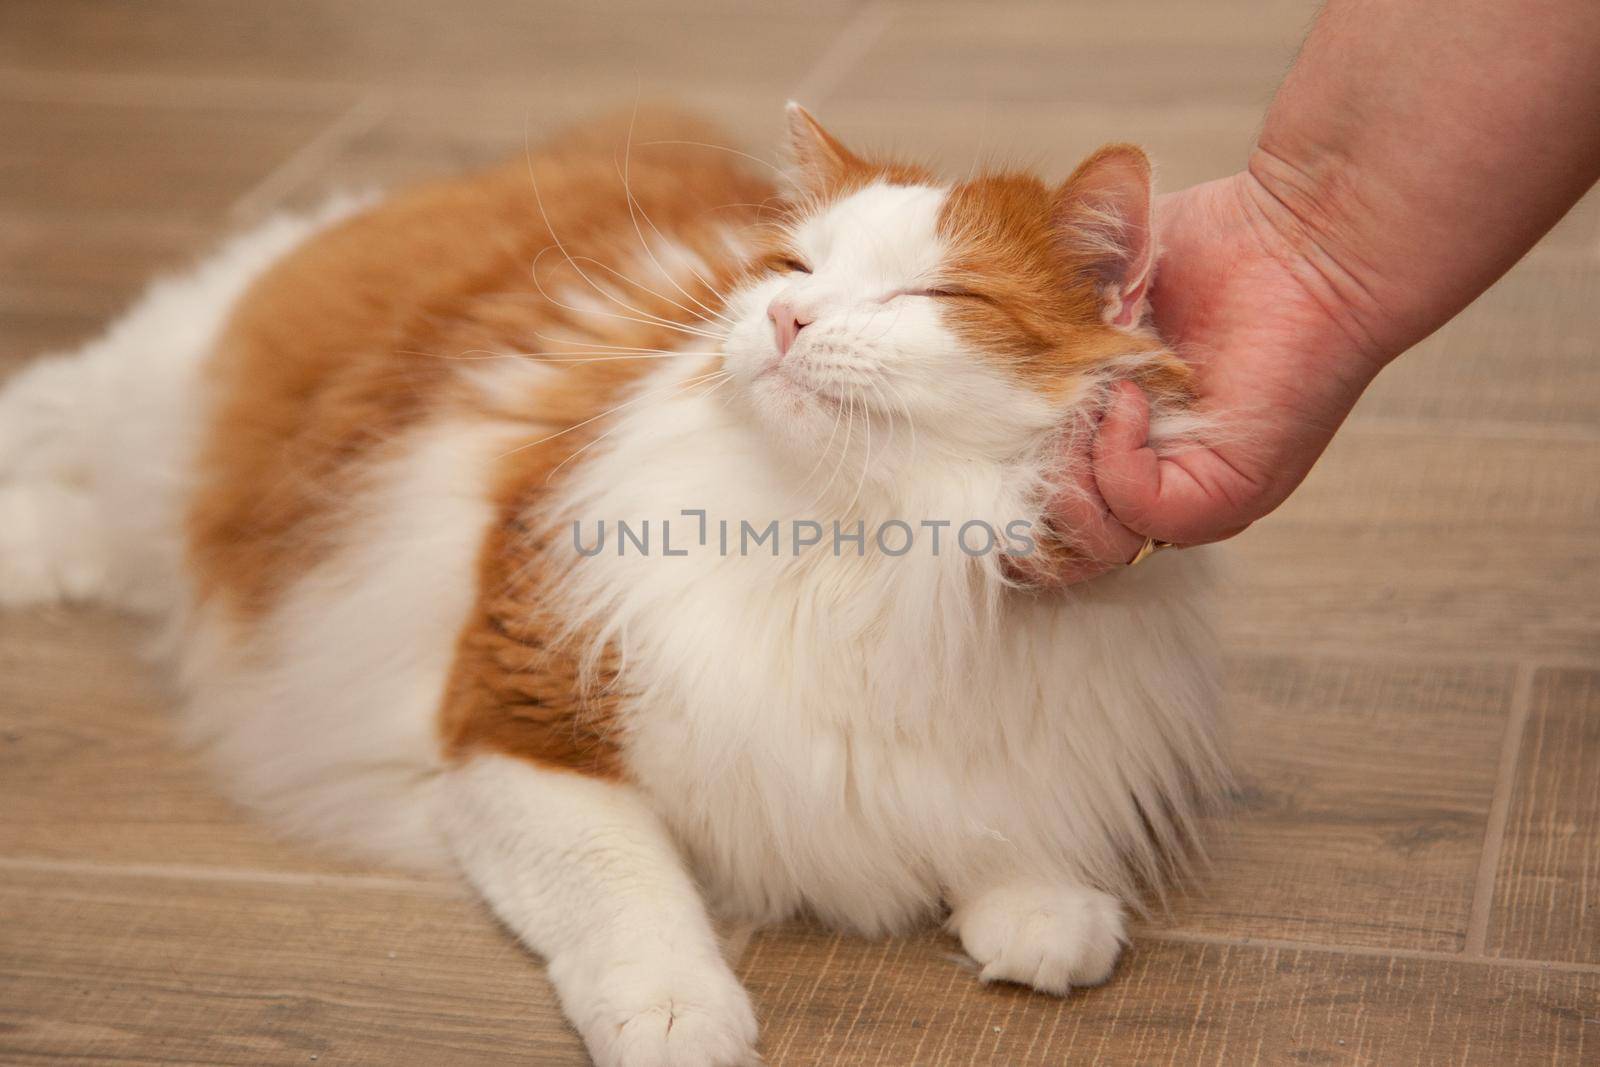 An orange and white cat purrs happily while being petted